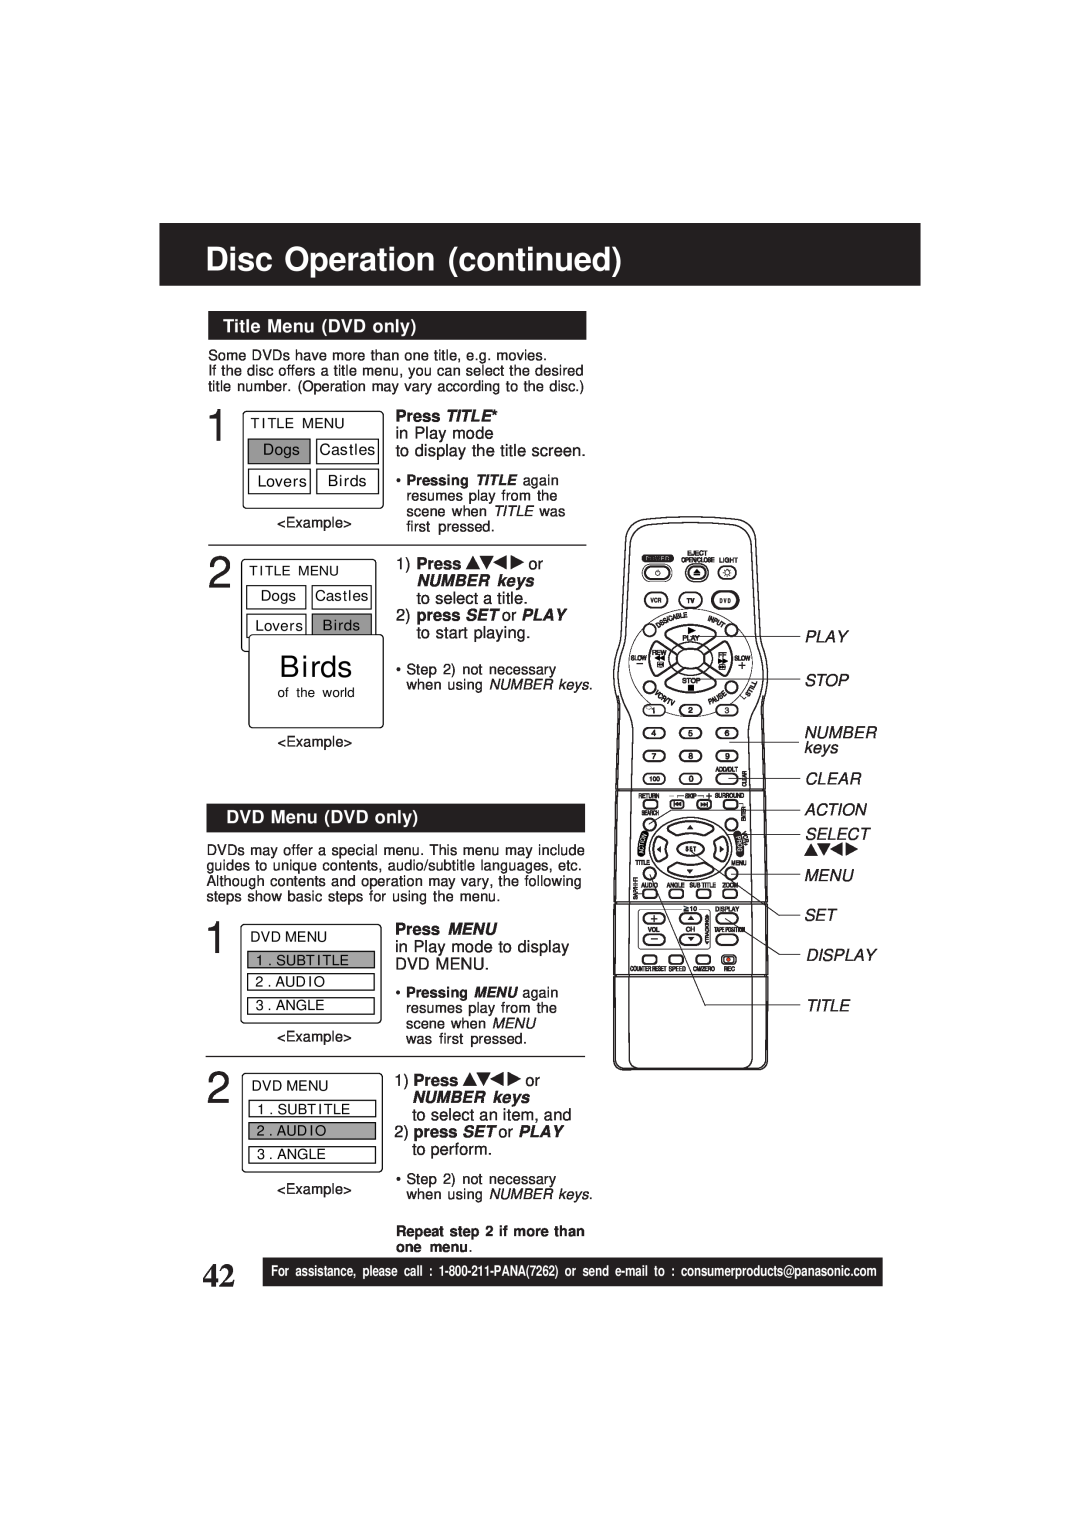 Panasonic PV-D4761 Disc Operation continued, Birds, Title Menu DVD only, DVD Menu DVD only, Press TITLE* in Play mode 